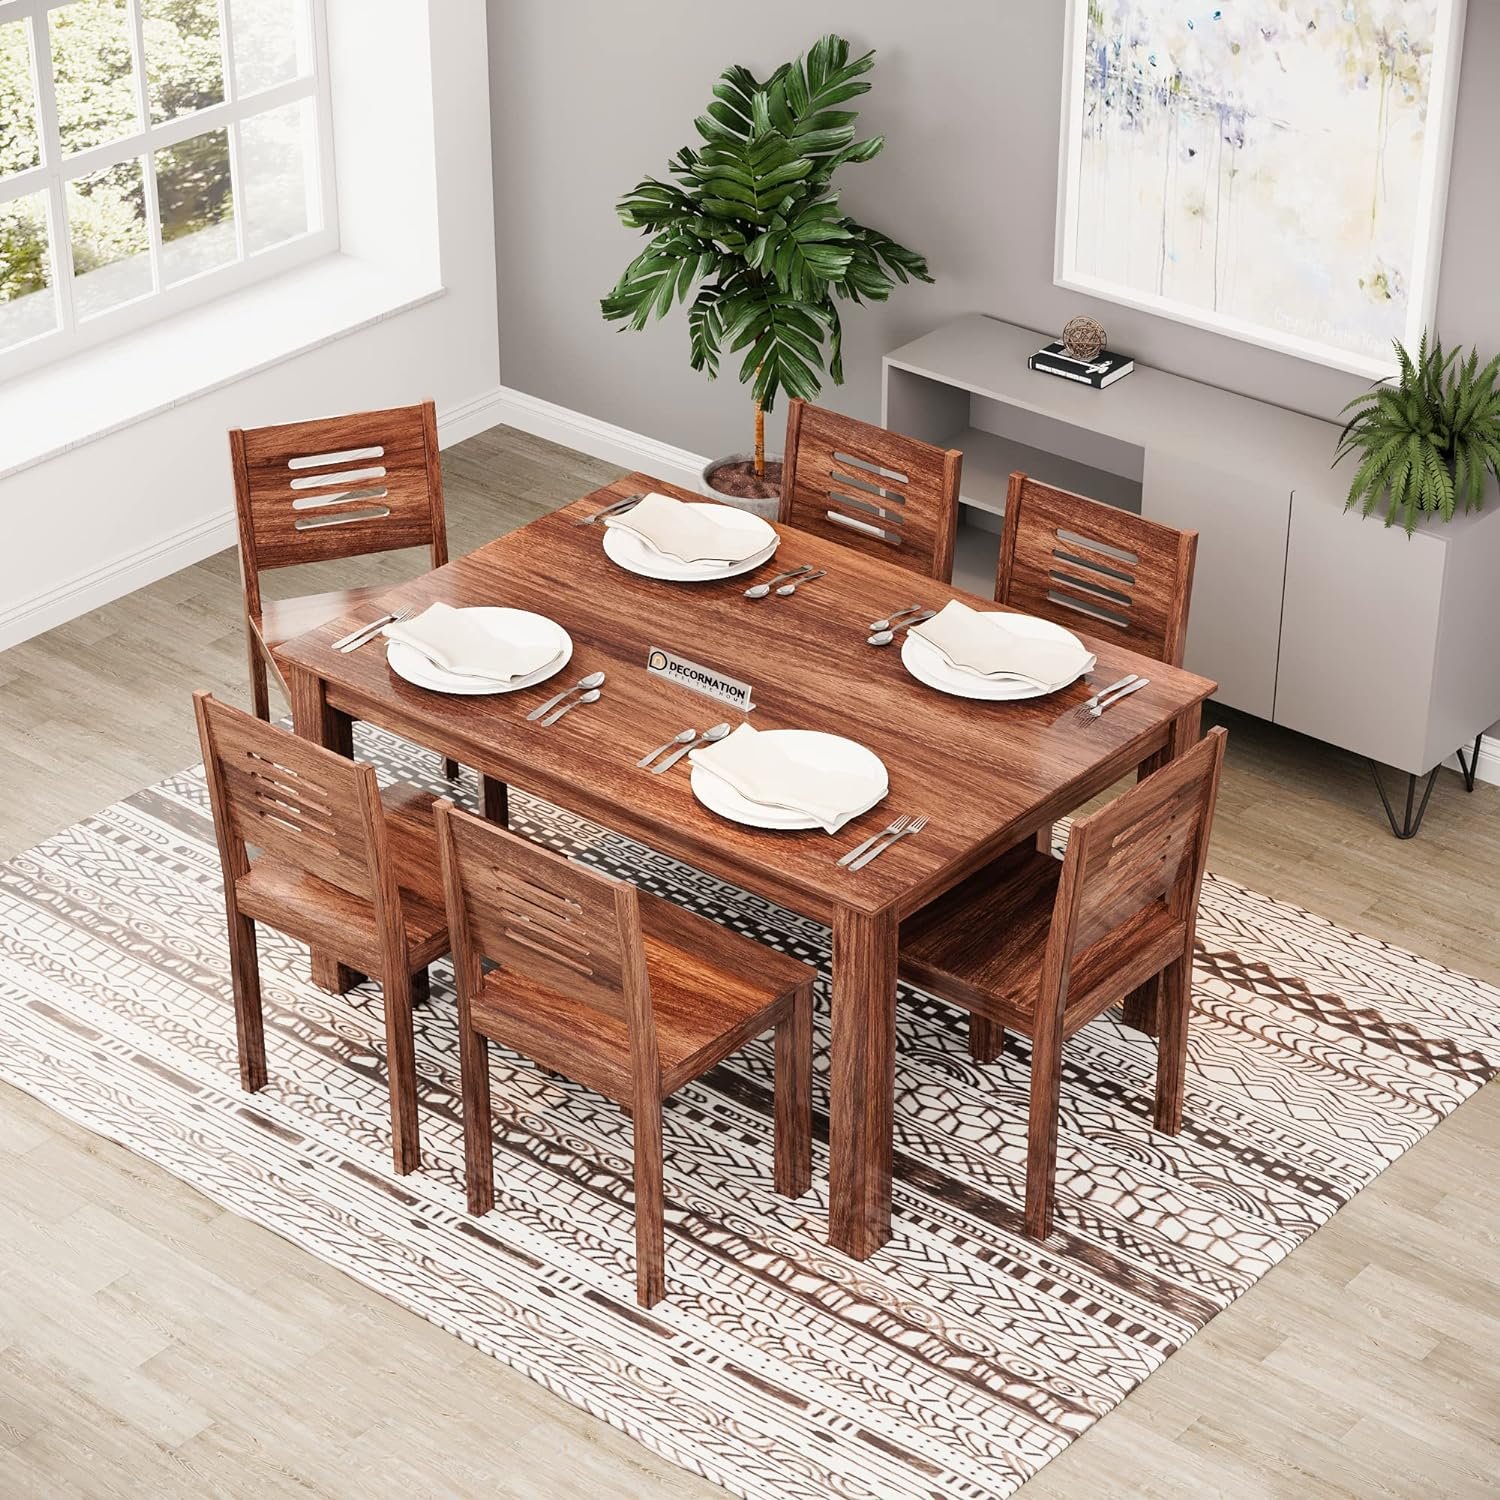 Juliana Solid Wood Dining Table